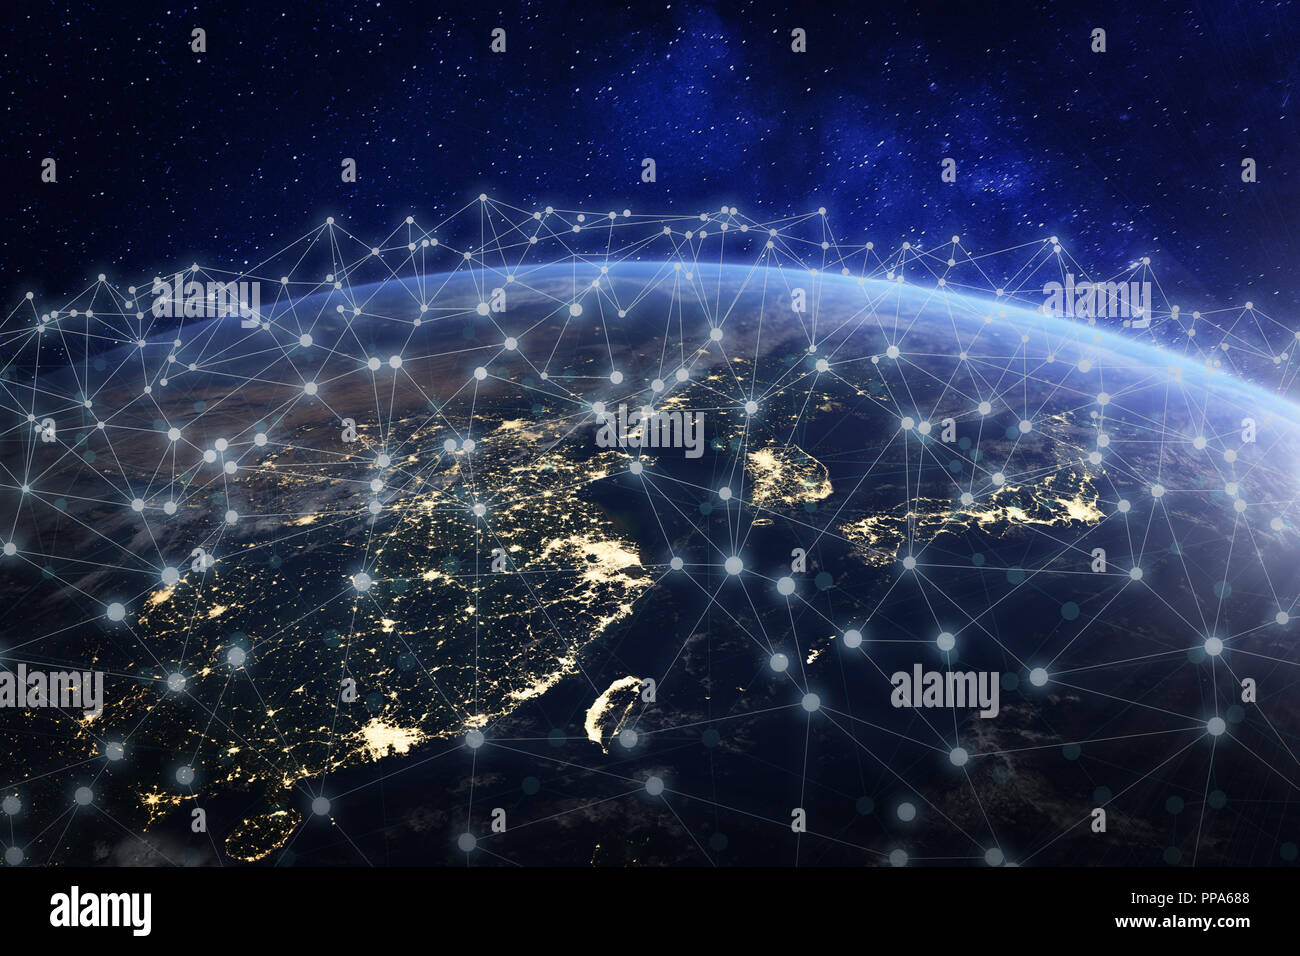 Asian telecommunication network connected over Asia, China, Japan, Korea, Hong Kong, concept about internet and global communication technology for fi Stock Photo